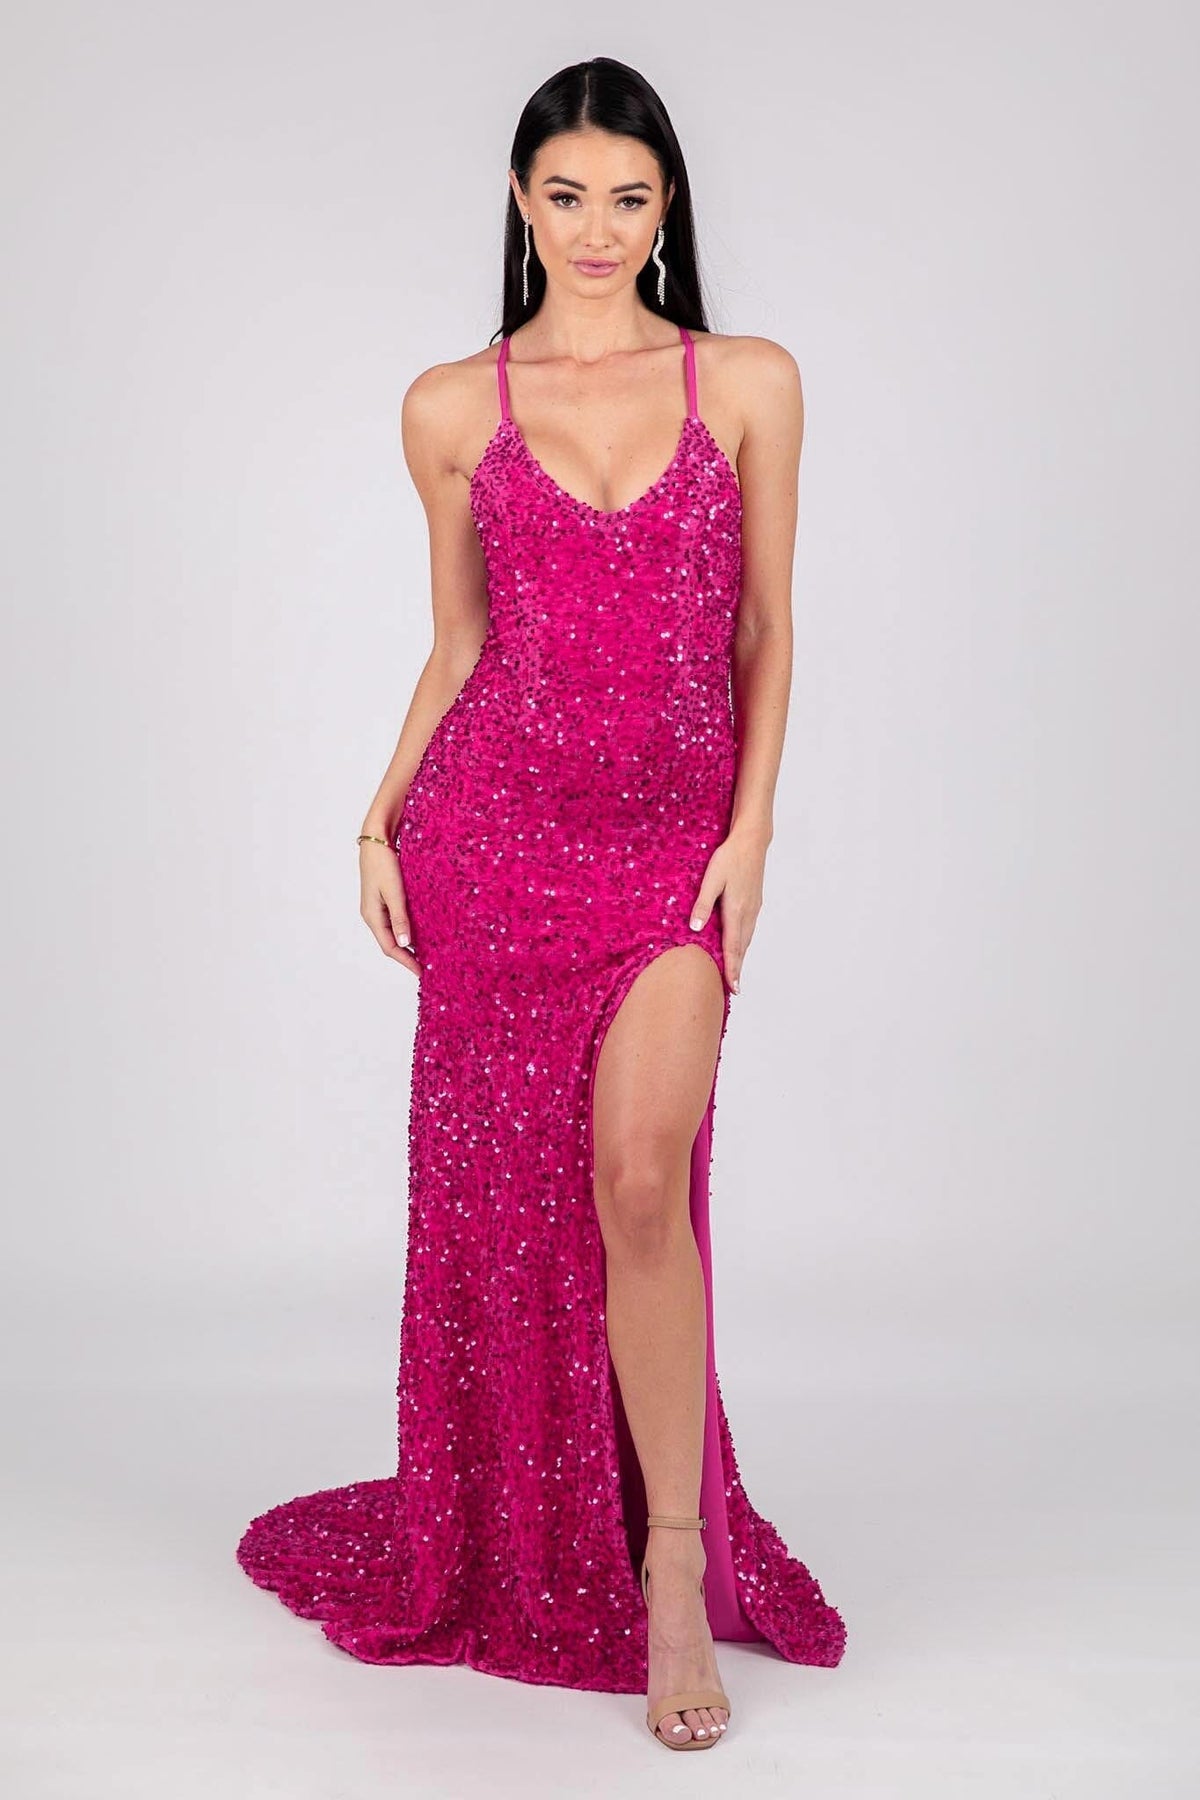 Fuchsia Bright Pink Velvet Sequin Full Length Evening Gown with V Neckline, Thin Shoulder Straps, Thigh High Side Split and Lace Up Open Back